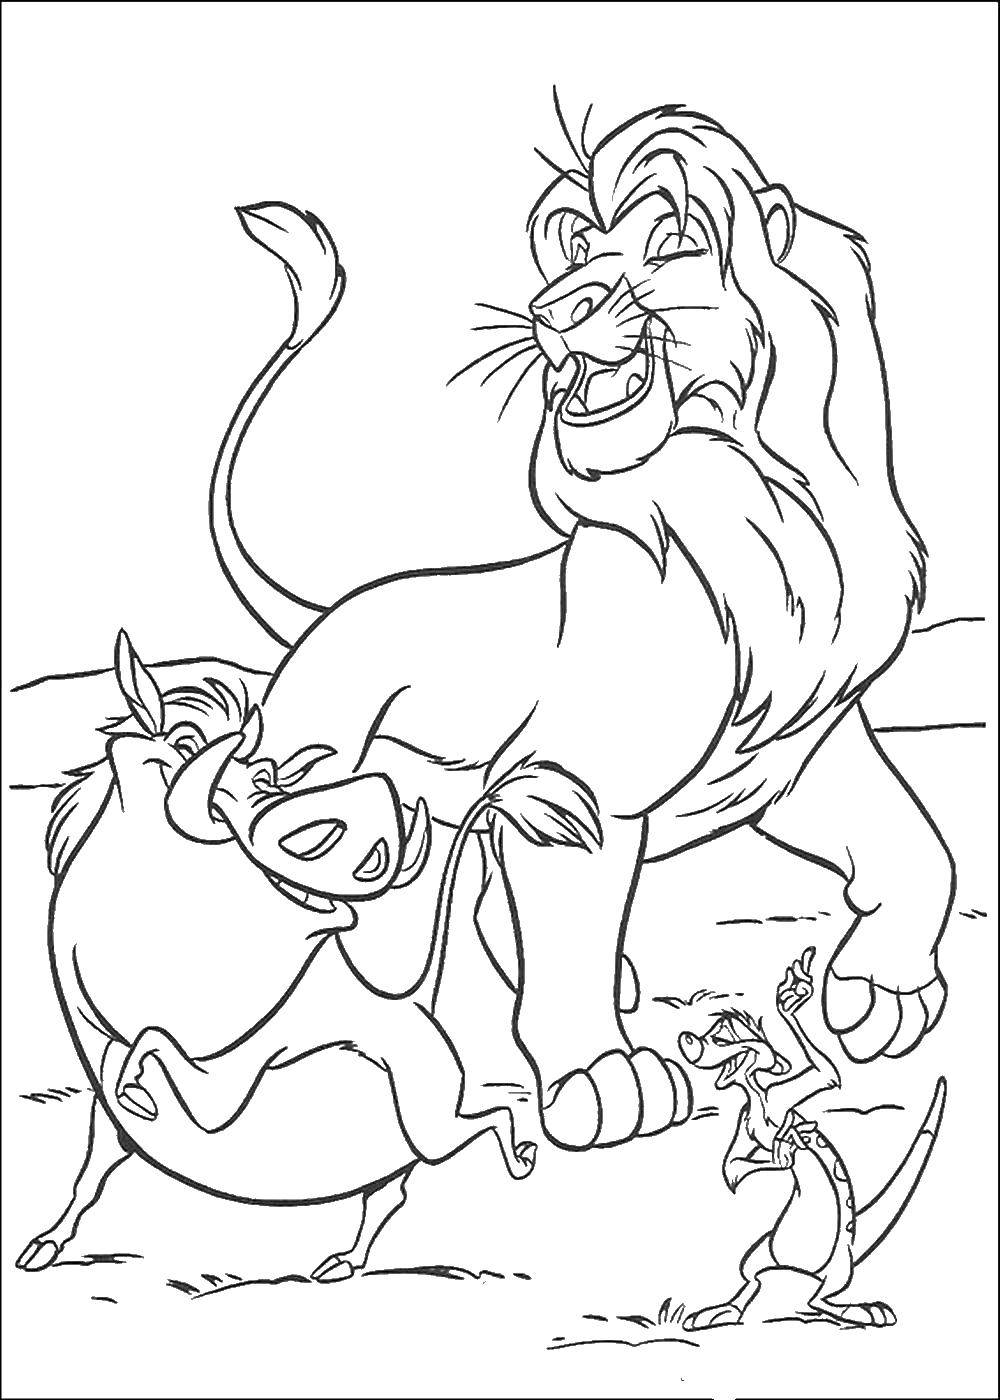 Coloring The lion king. Category cartoons. Tags:  The lion king, cartoons, lions.